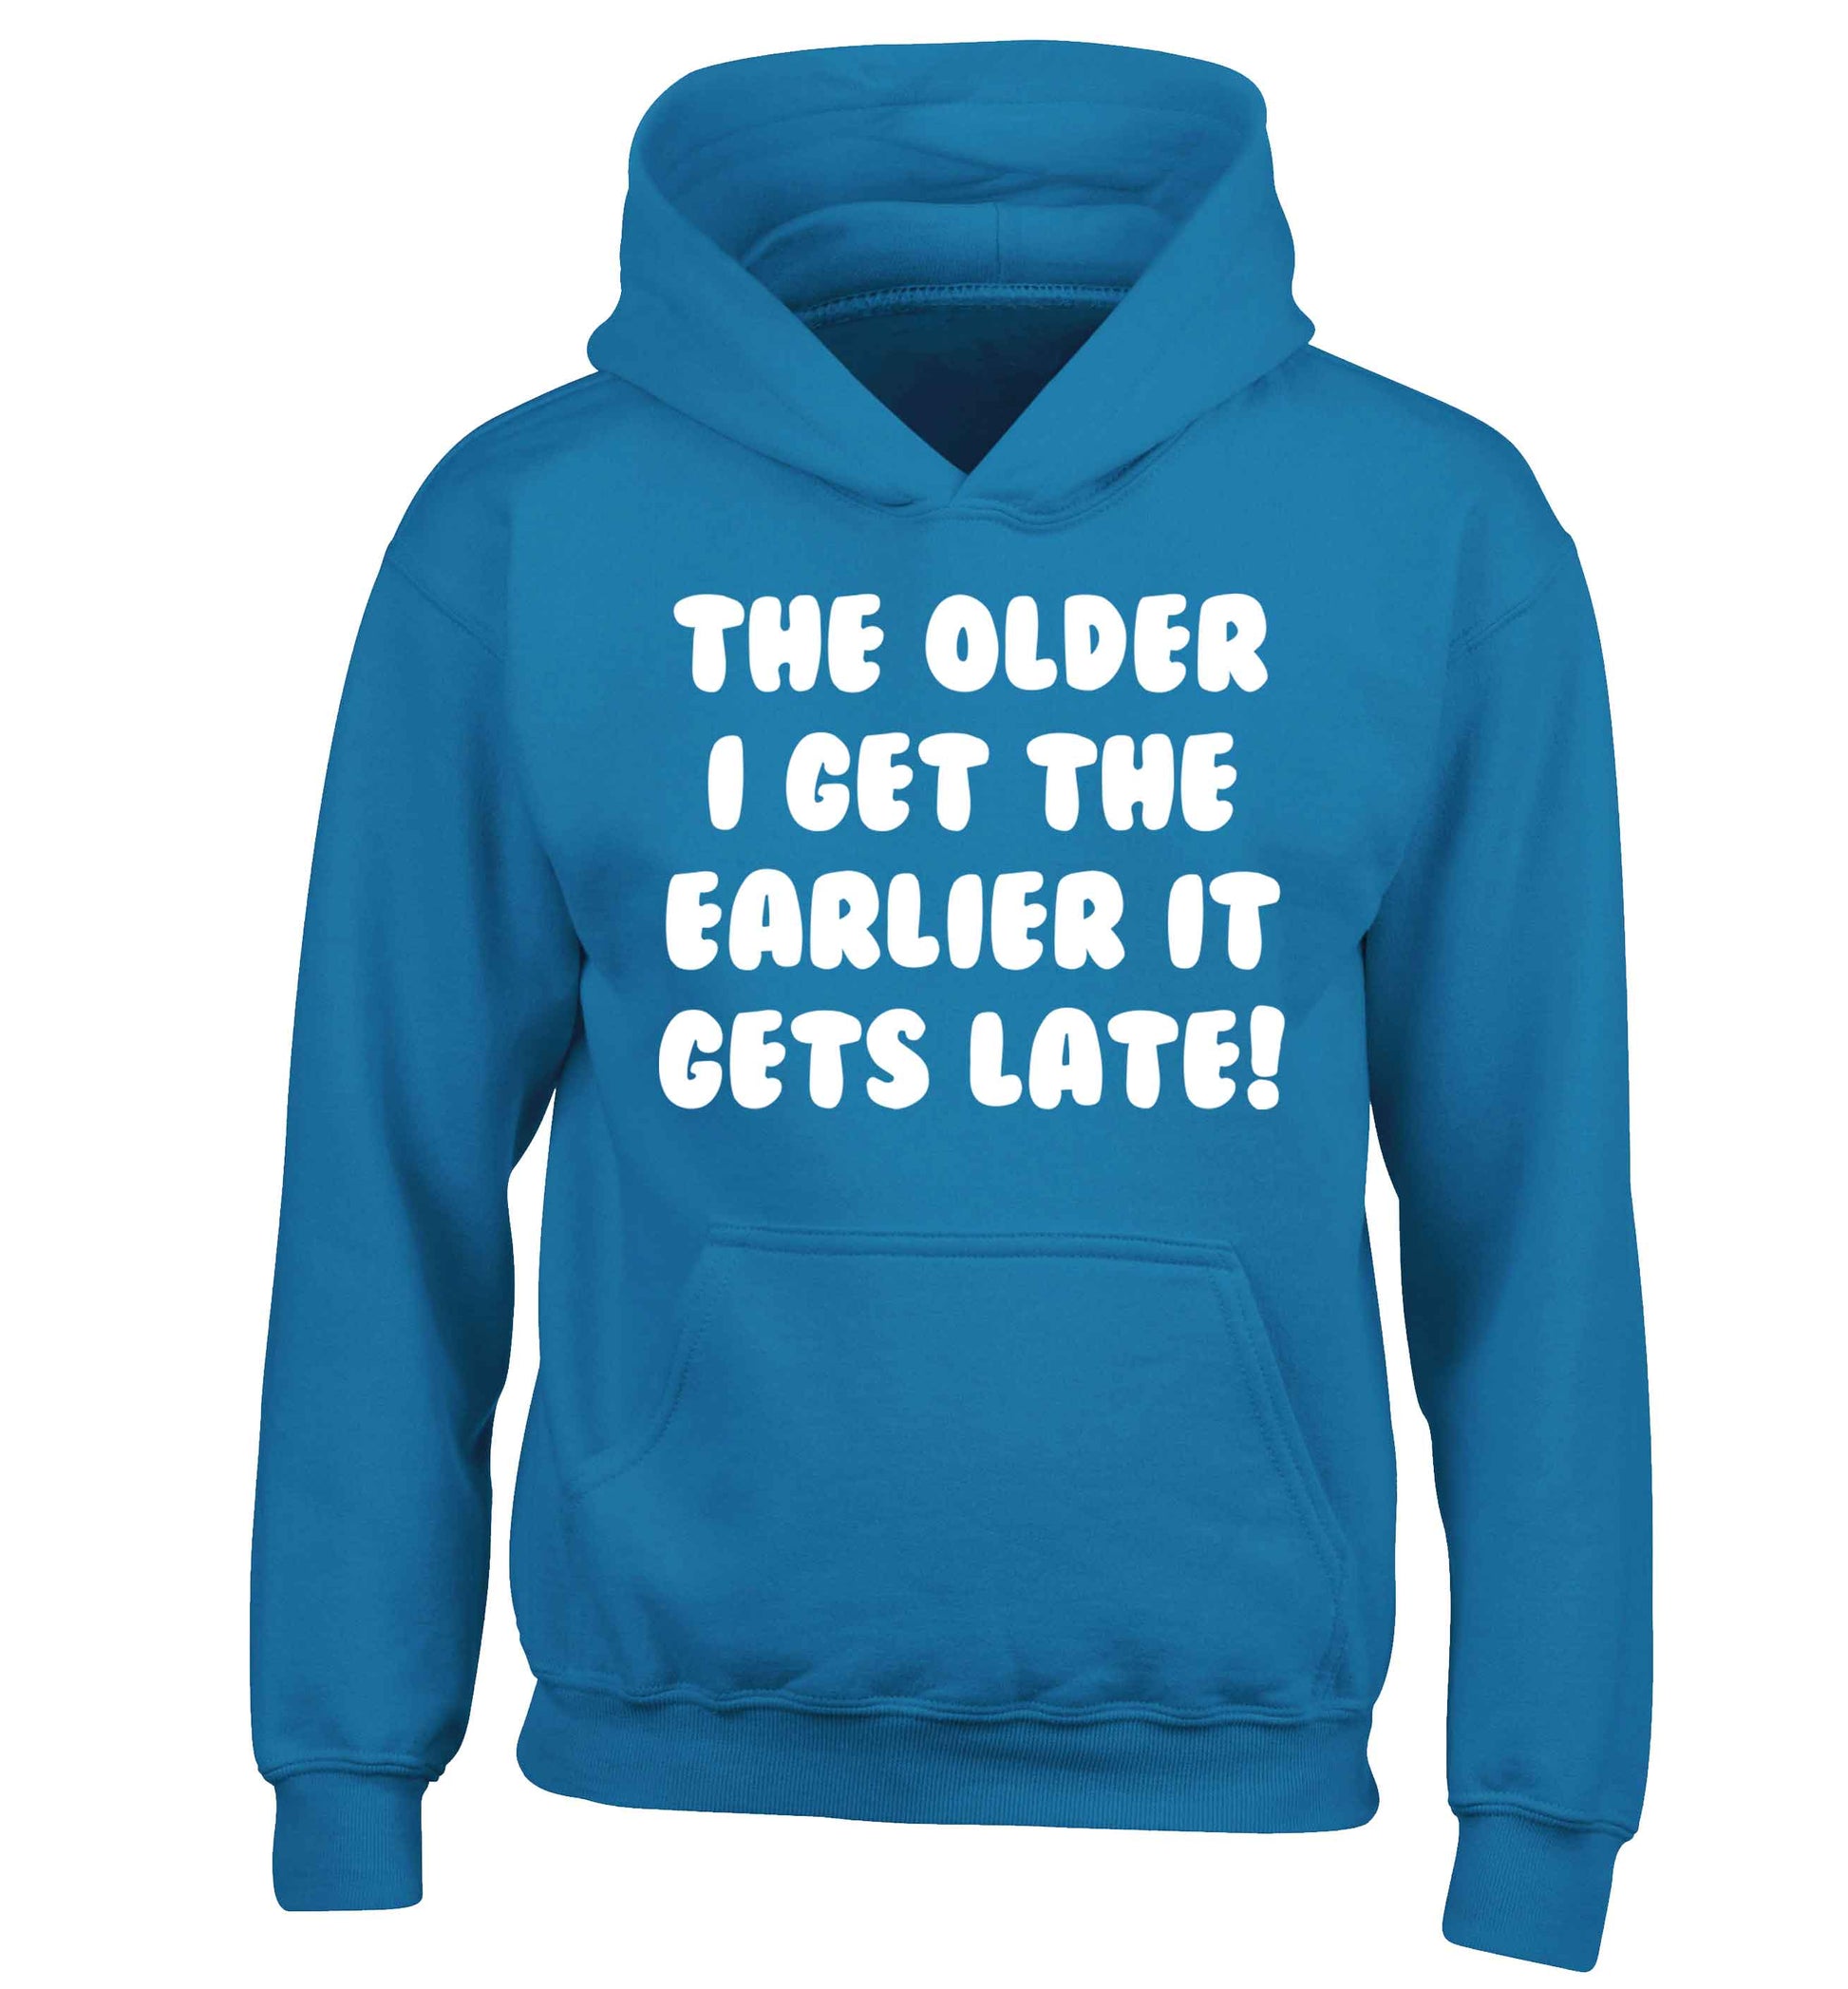 The older I get the earlier it gets late! children's blue hoodie 12-13 Years